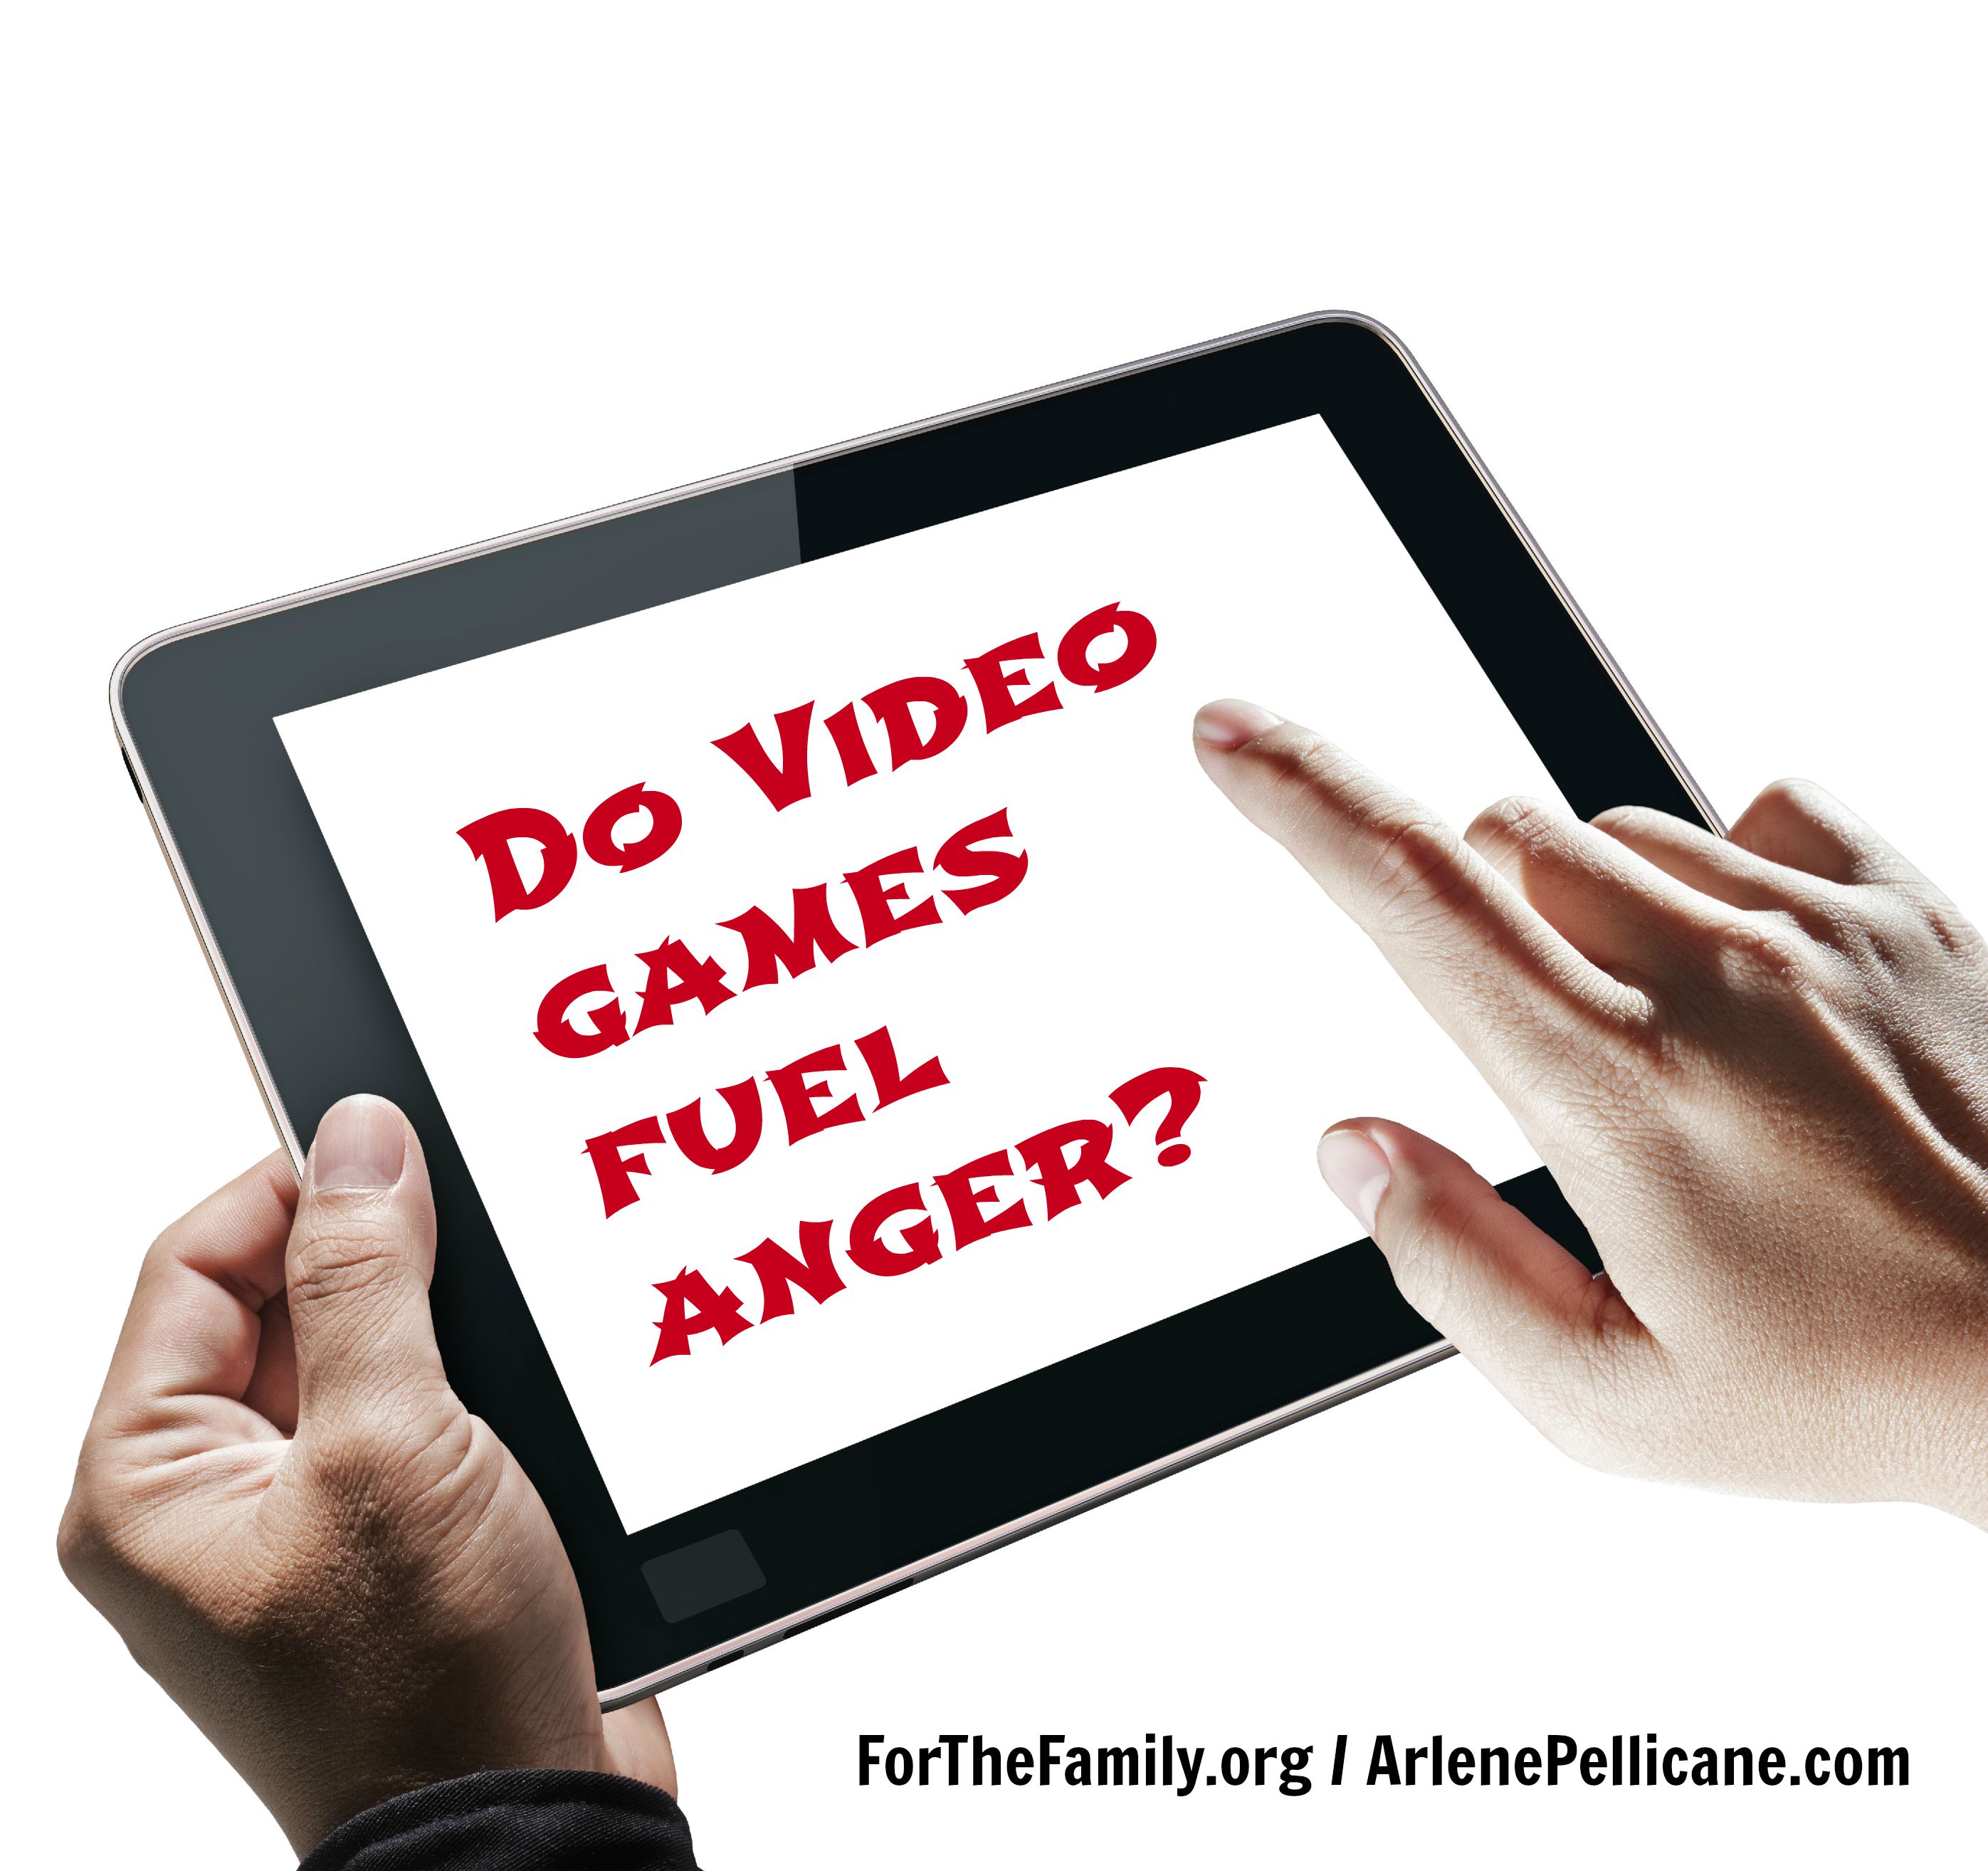 Do Video Games Fuel Anger?